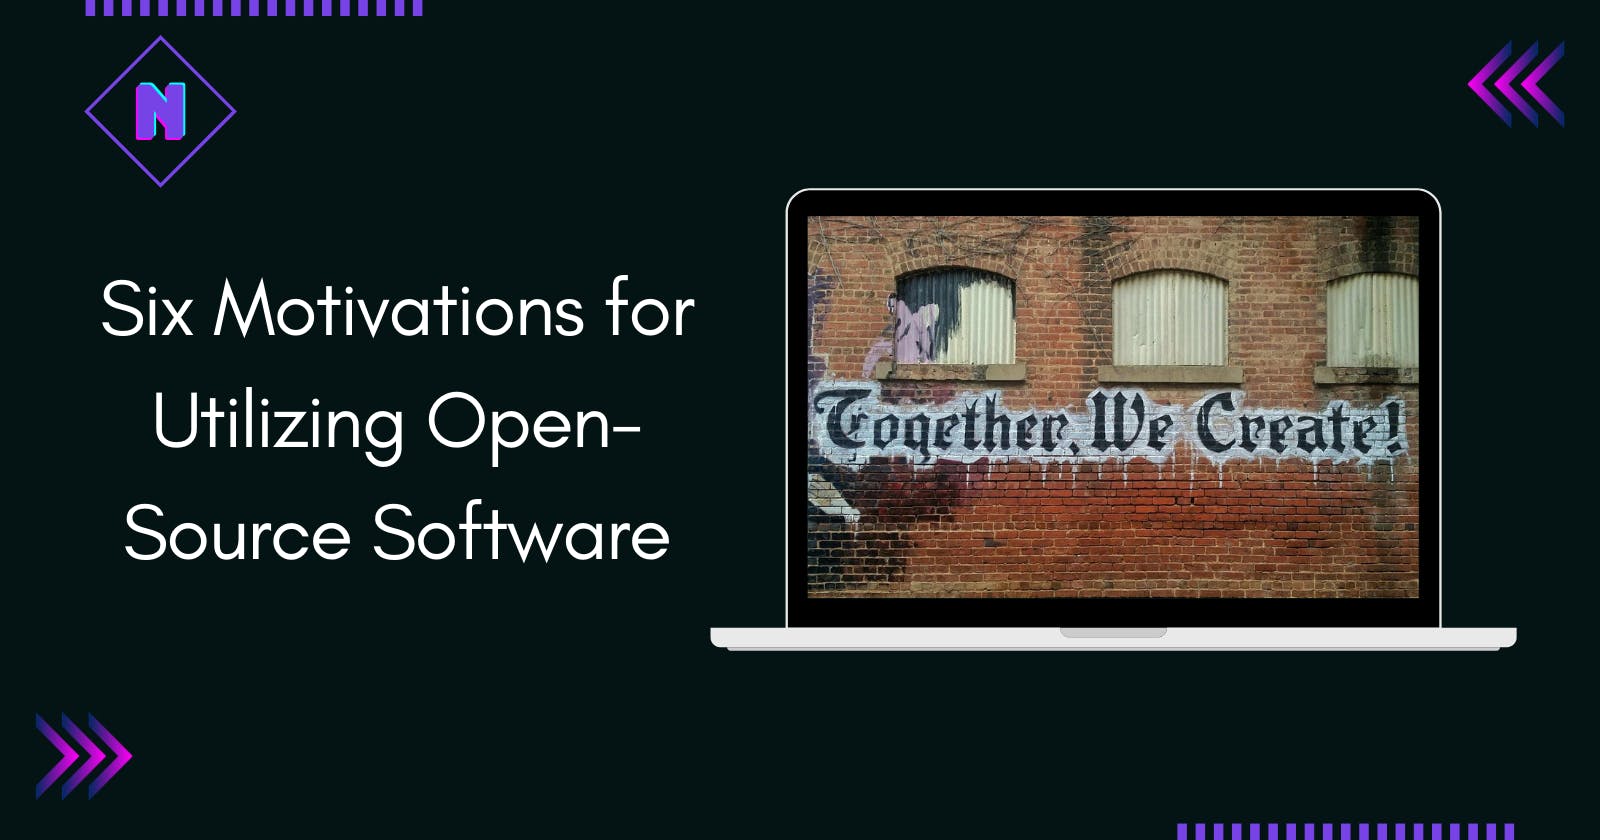 Here are Six Motivations for Utilizing Open-Source Software